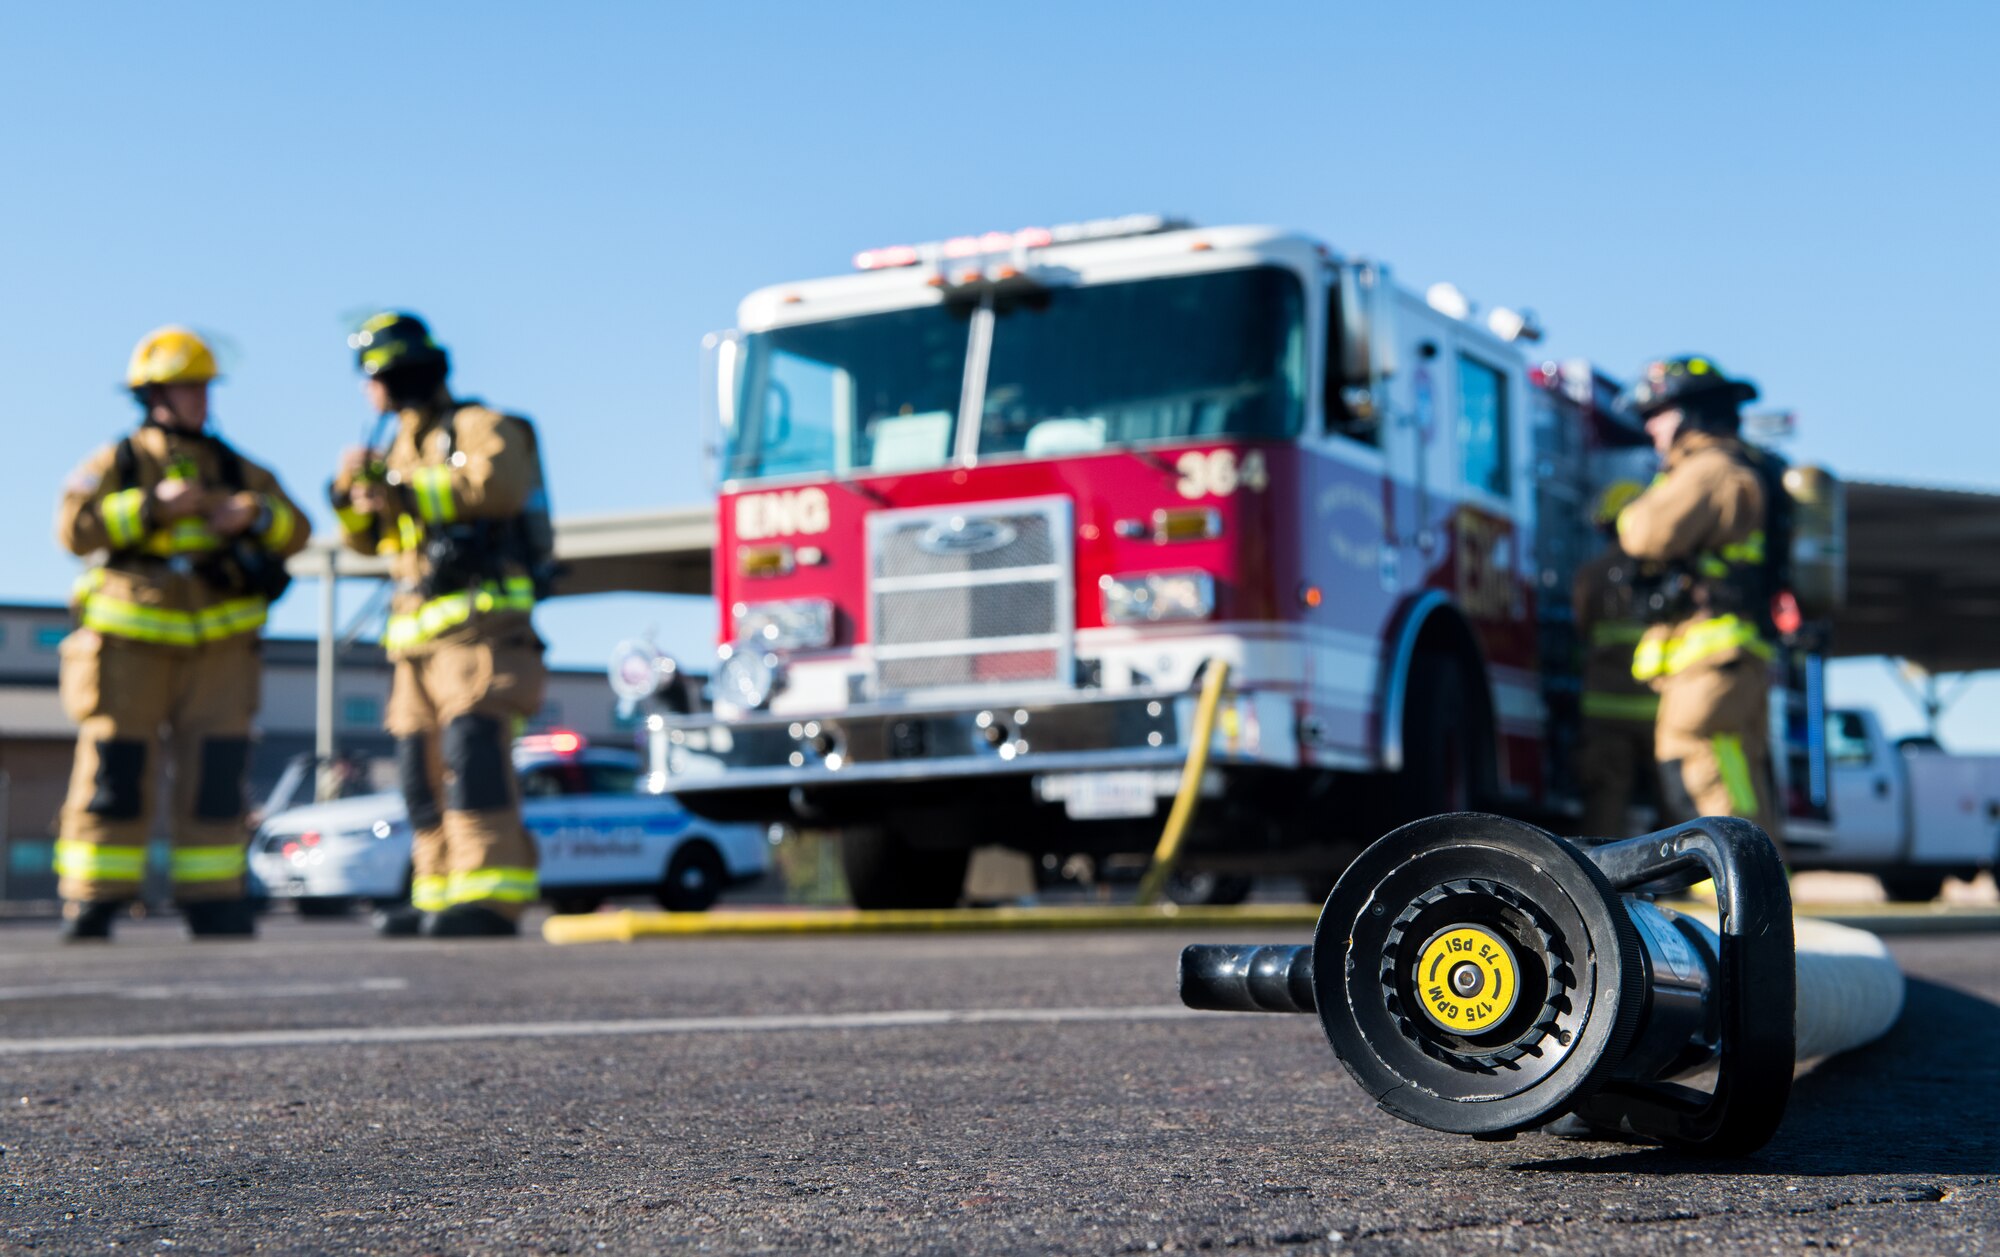 Firefighters from the 56th Civil Engineer Squadron respond to a simulated fuel spill during an exercise Oct. 4, 2019, at Luke Air Force Base, Ariz.